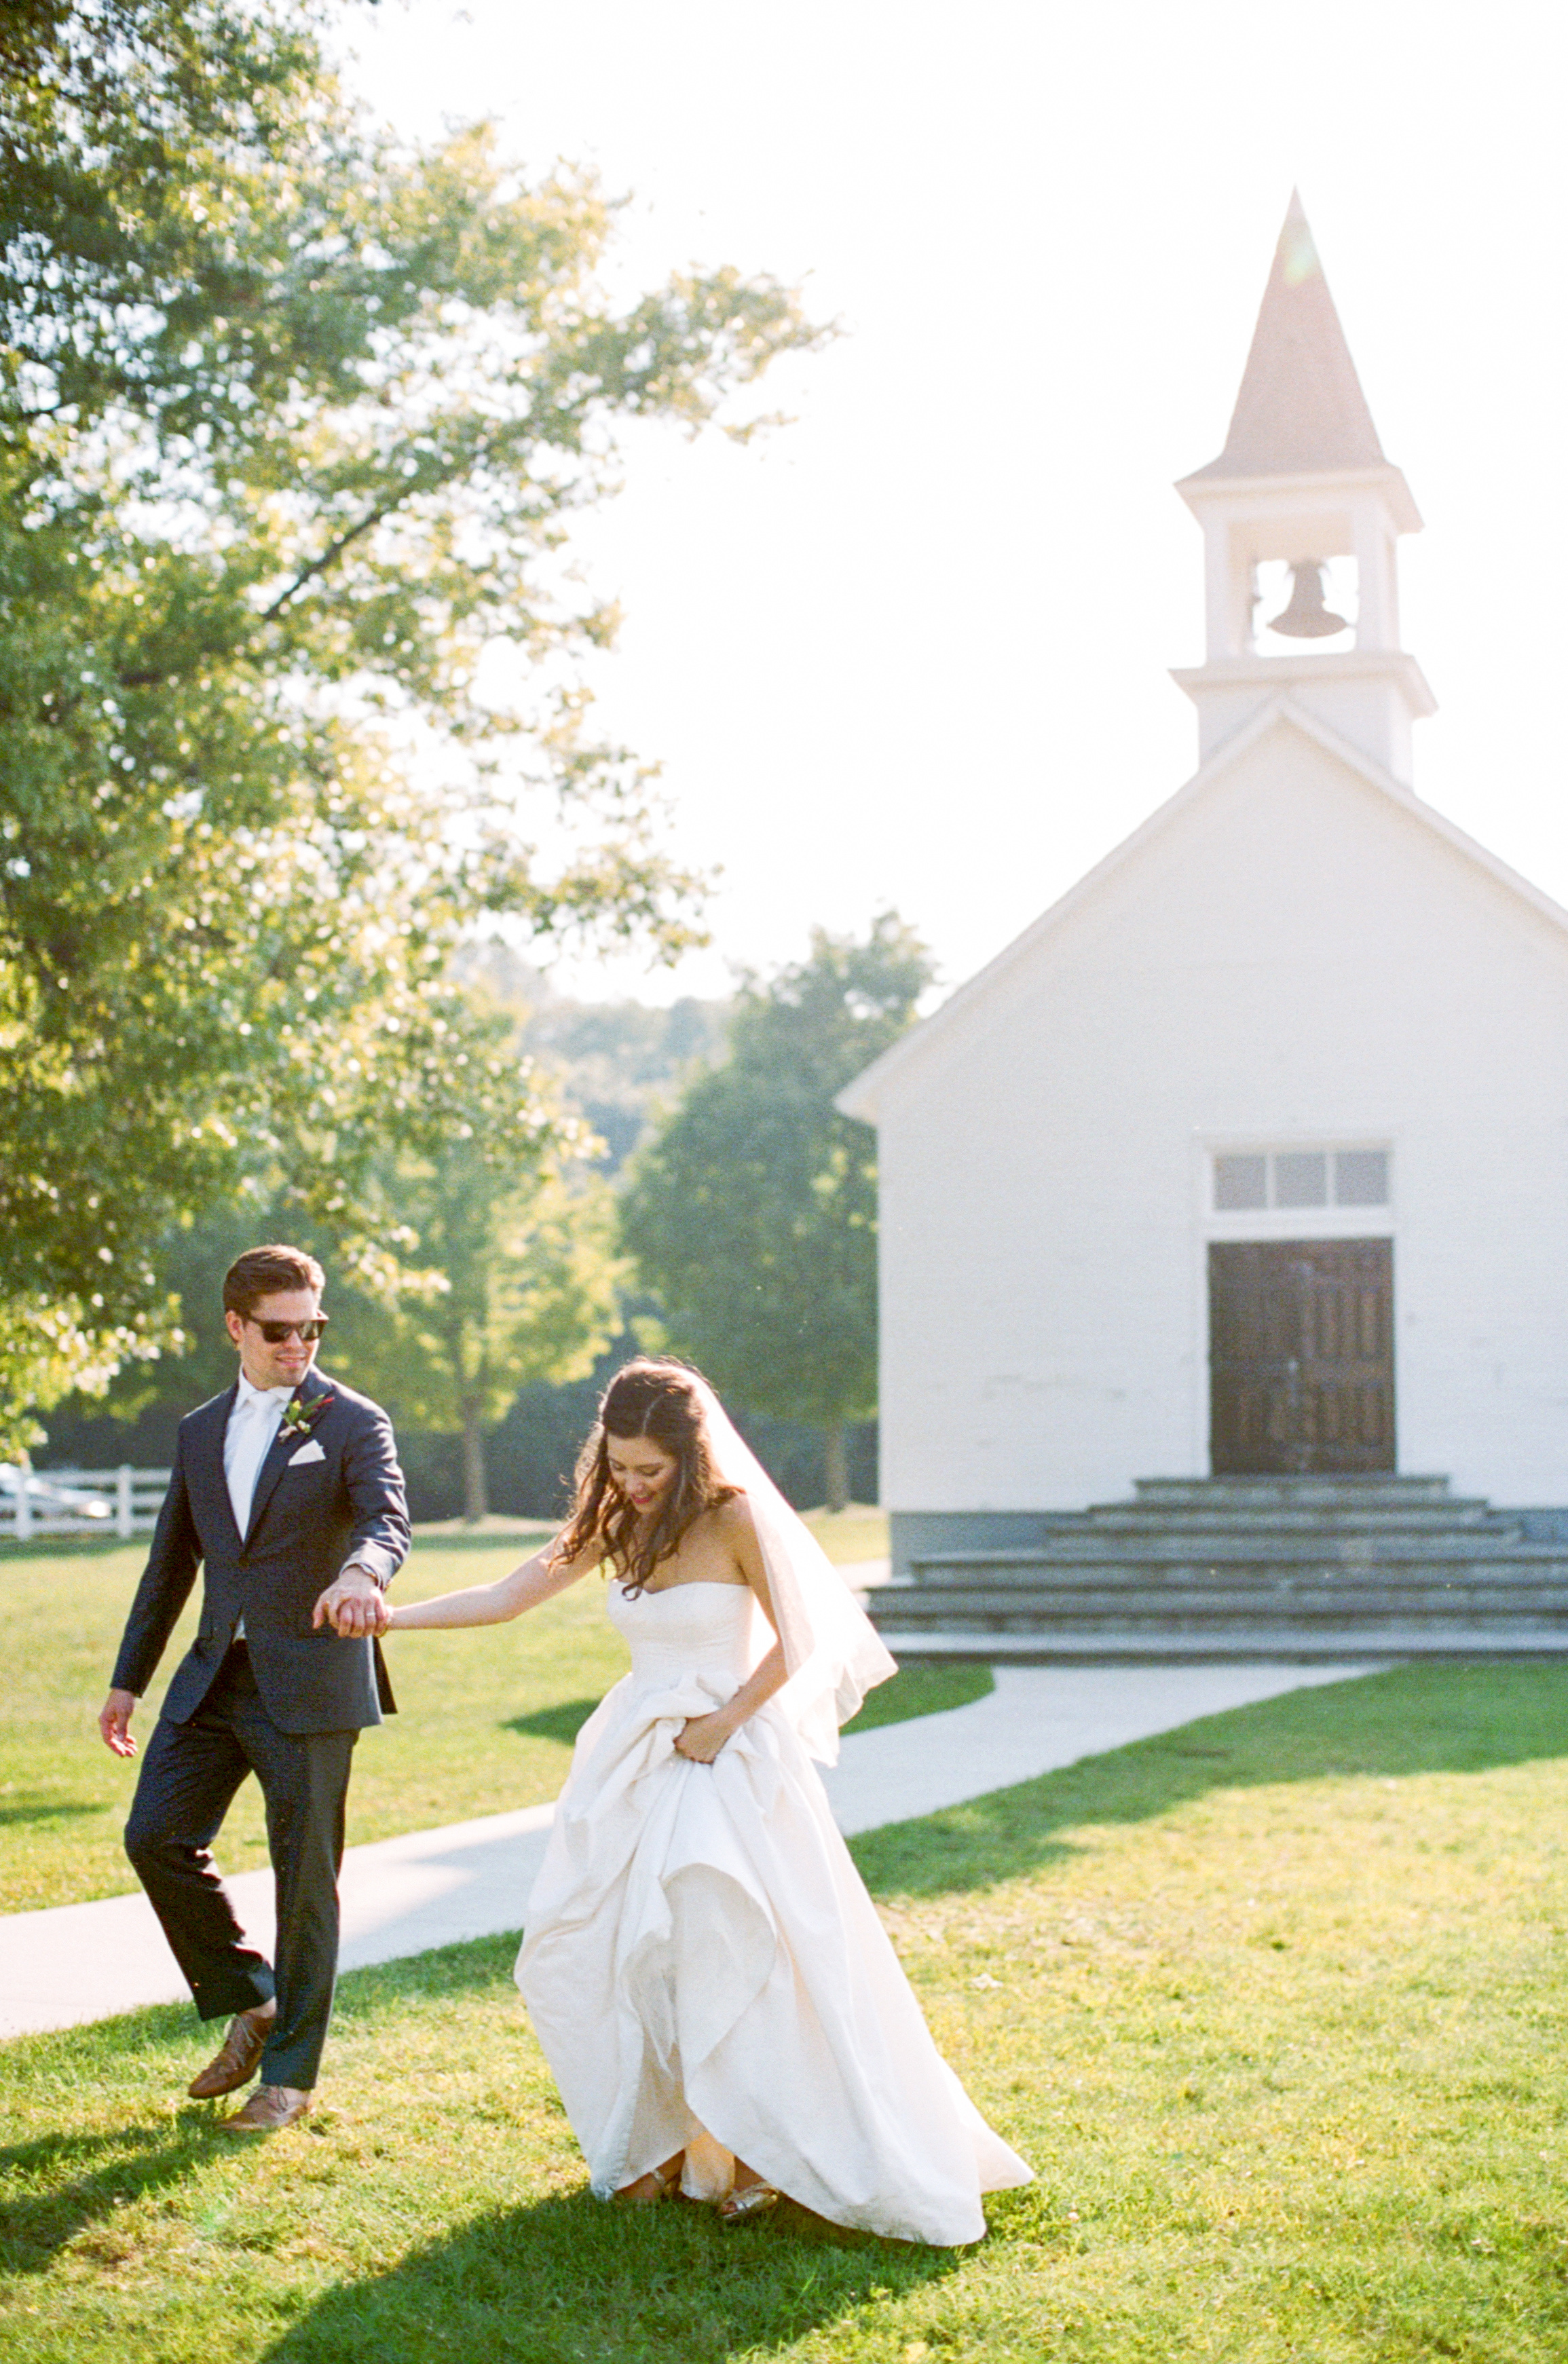 Holland Michigan Wedding Chapel | The Day's Design | Cory Weber Photography